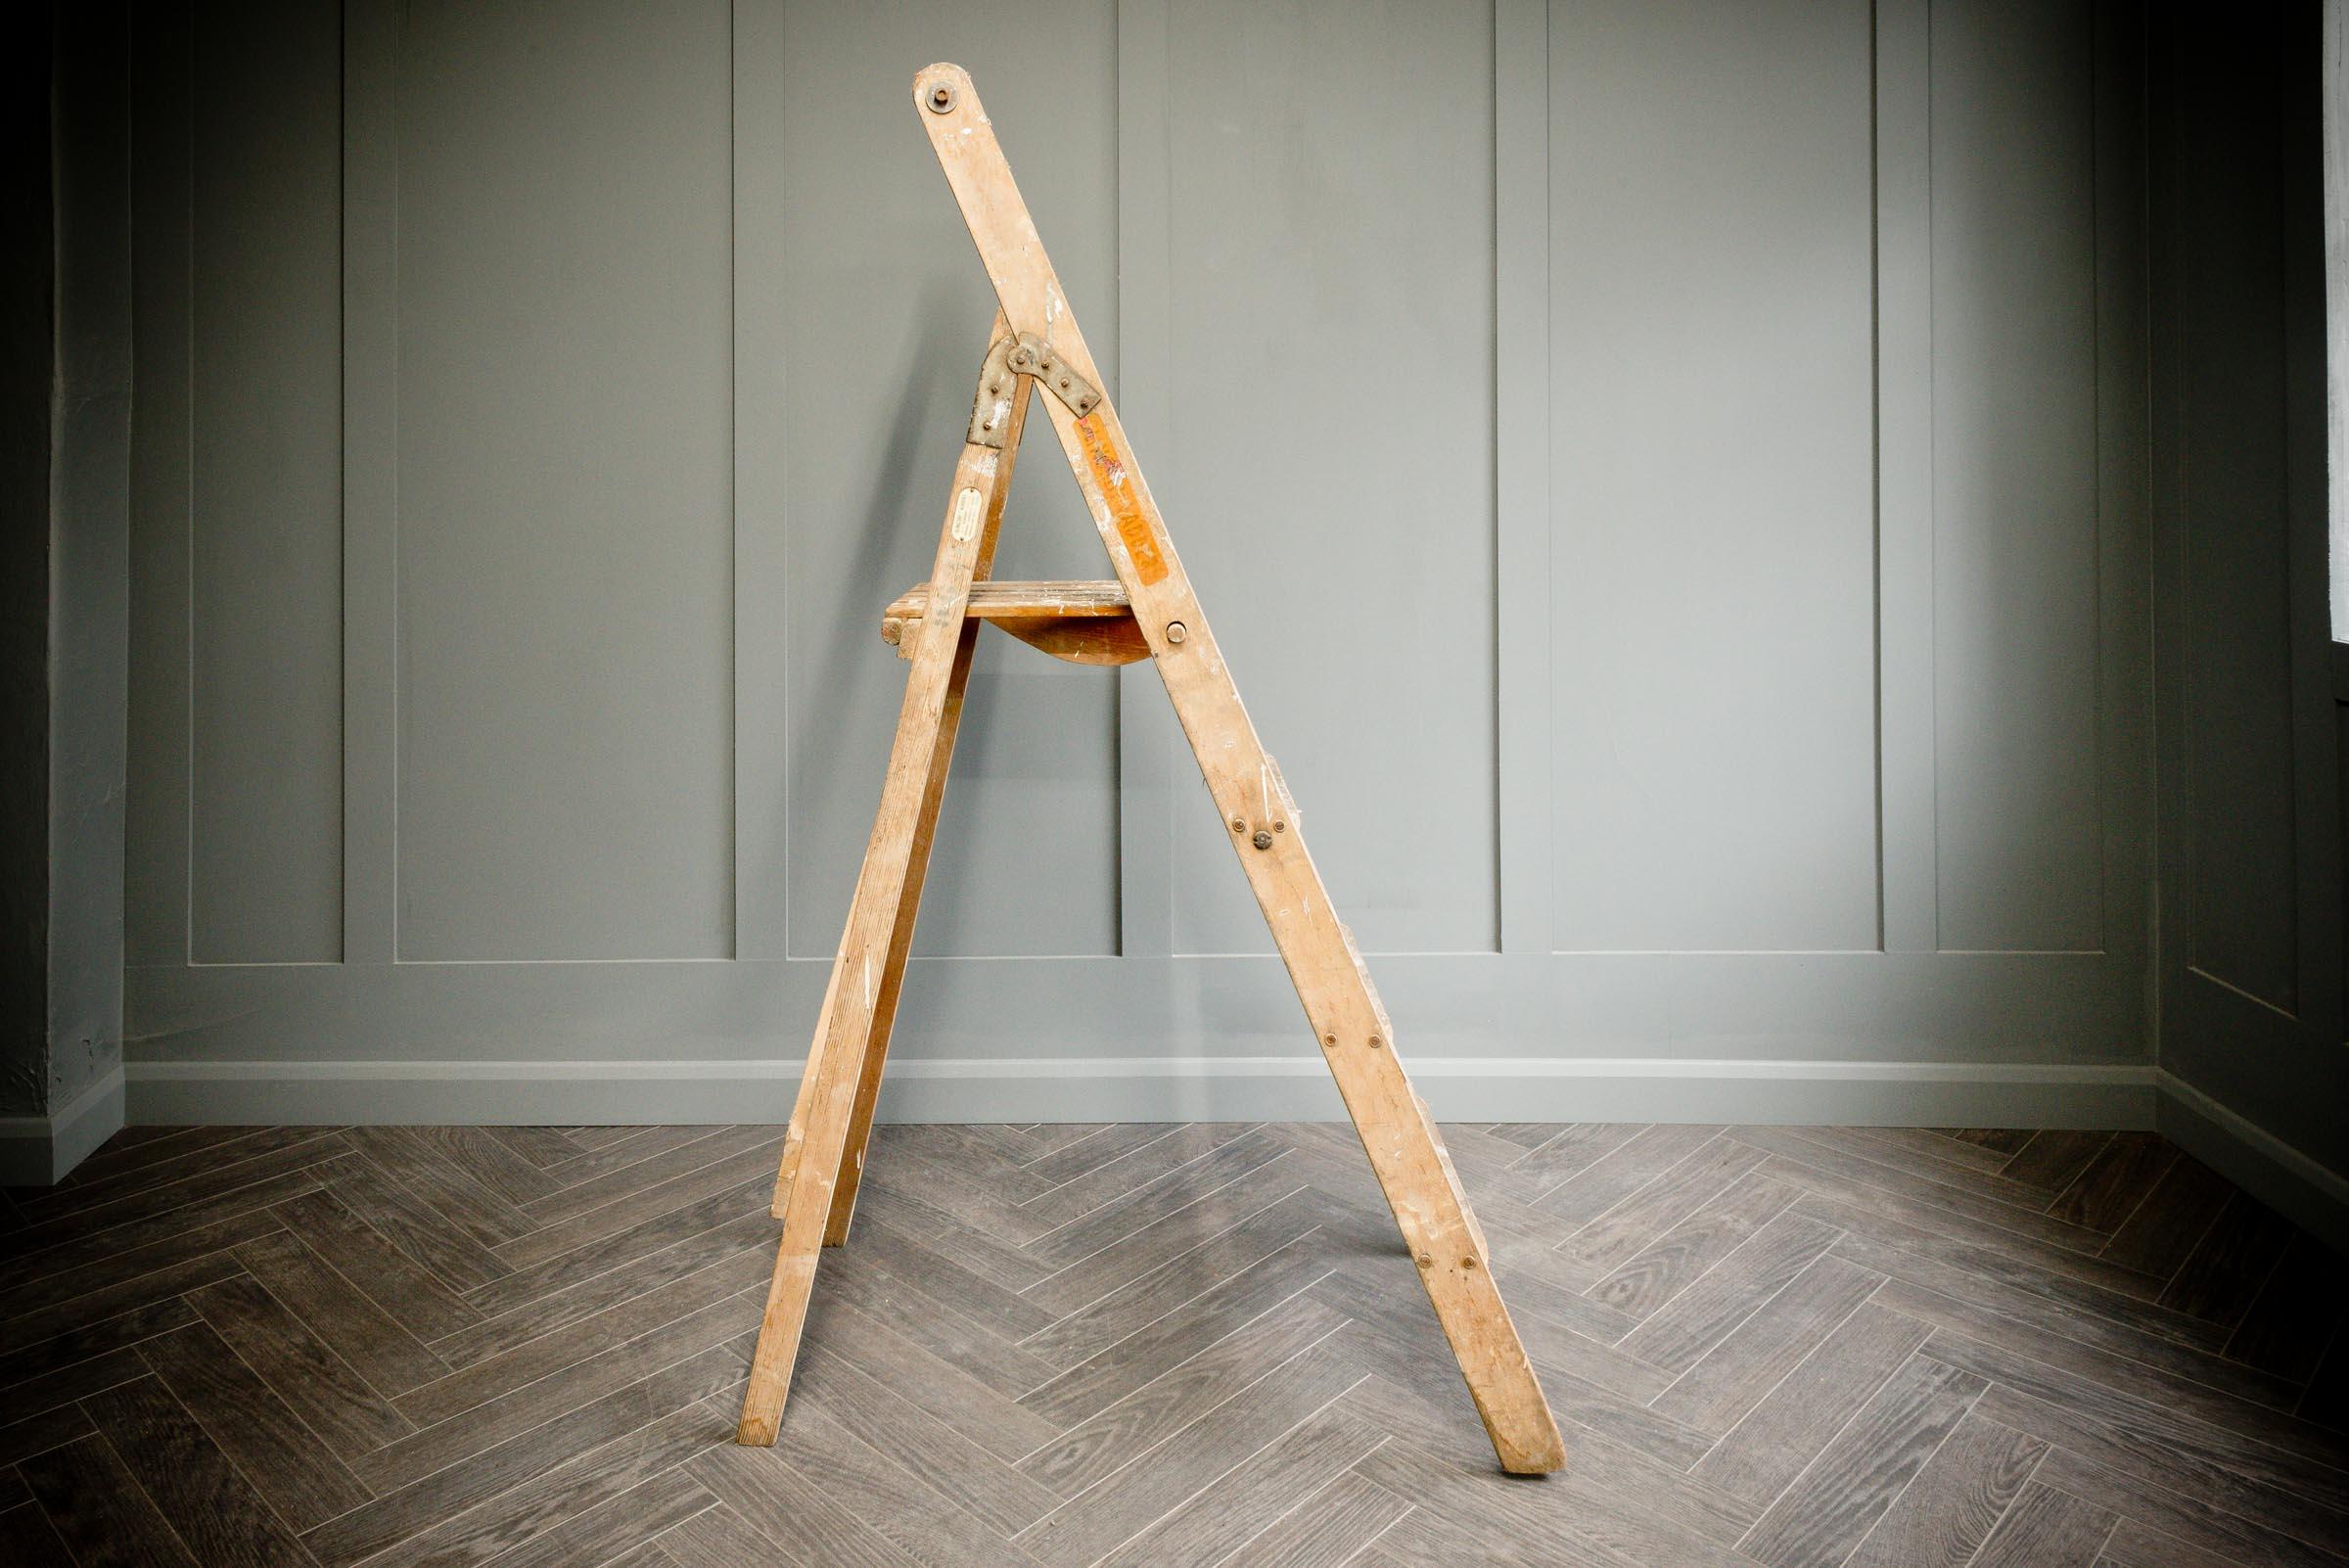 An original wooden Slingsby step ladder in medium size, consists of three steps and the fourth tray top. The ladder closes by two metal hinges either side of the ladder. The ladder has original paint marks consistent with age and use.